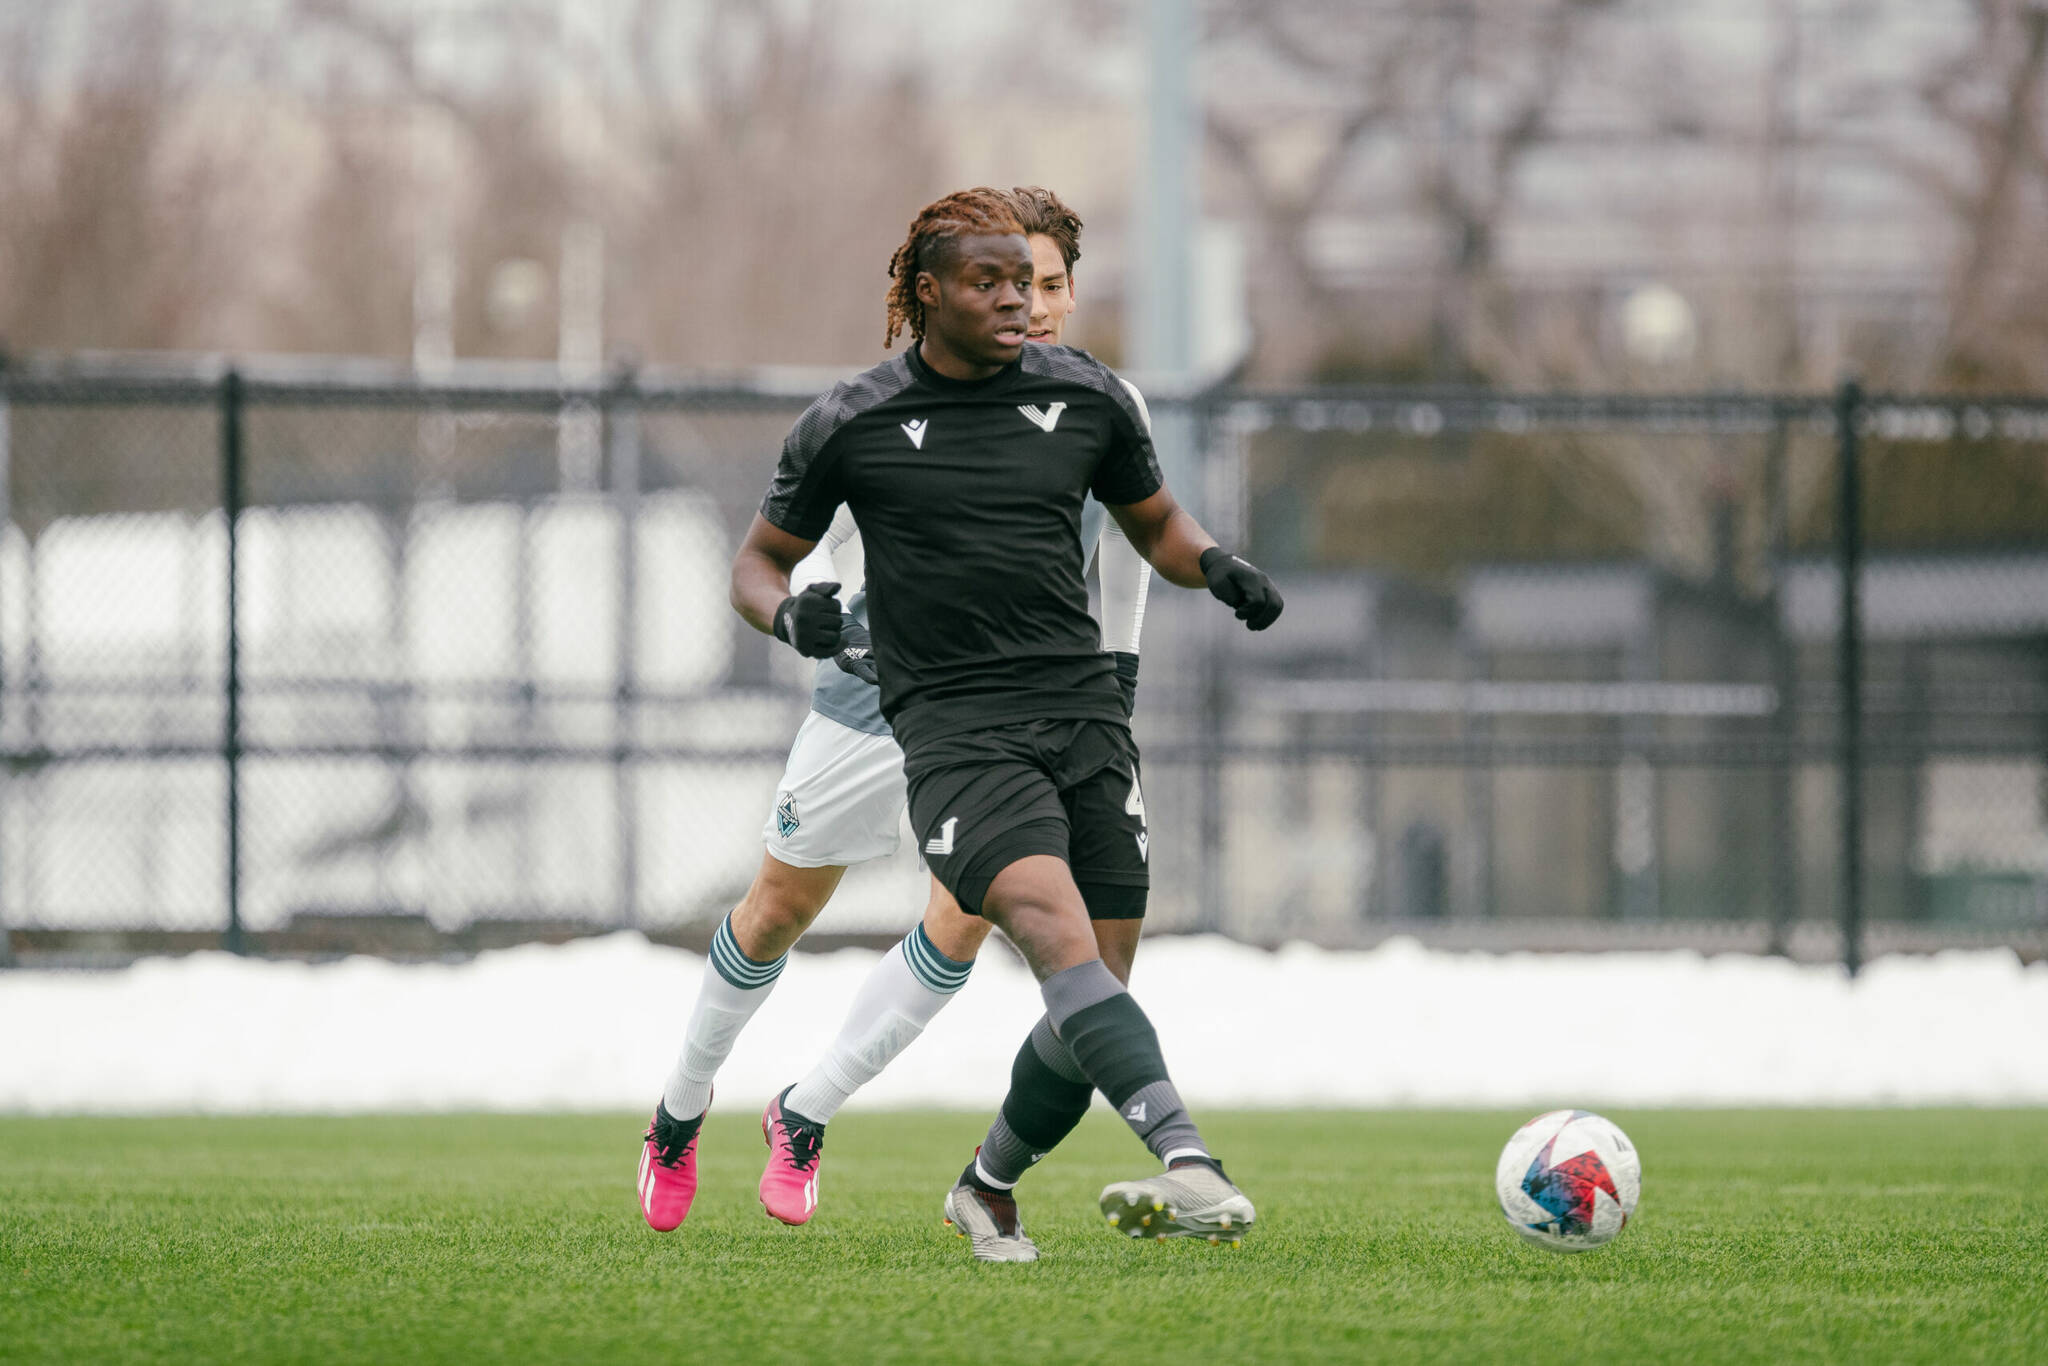 Ibrahim Bakare joins Vancouver FC as a centre-back in March 2023, and now parted ways with the Langley-based pro soceer team. (Beau Chevalier, Vancouver FC/Special to Langley Advance Times)